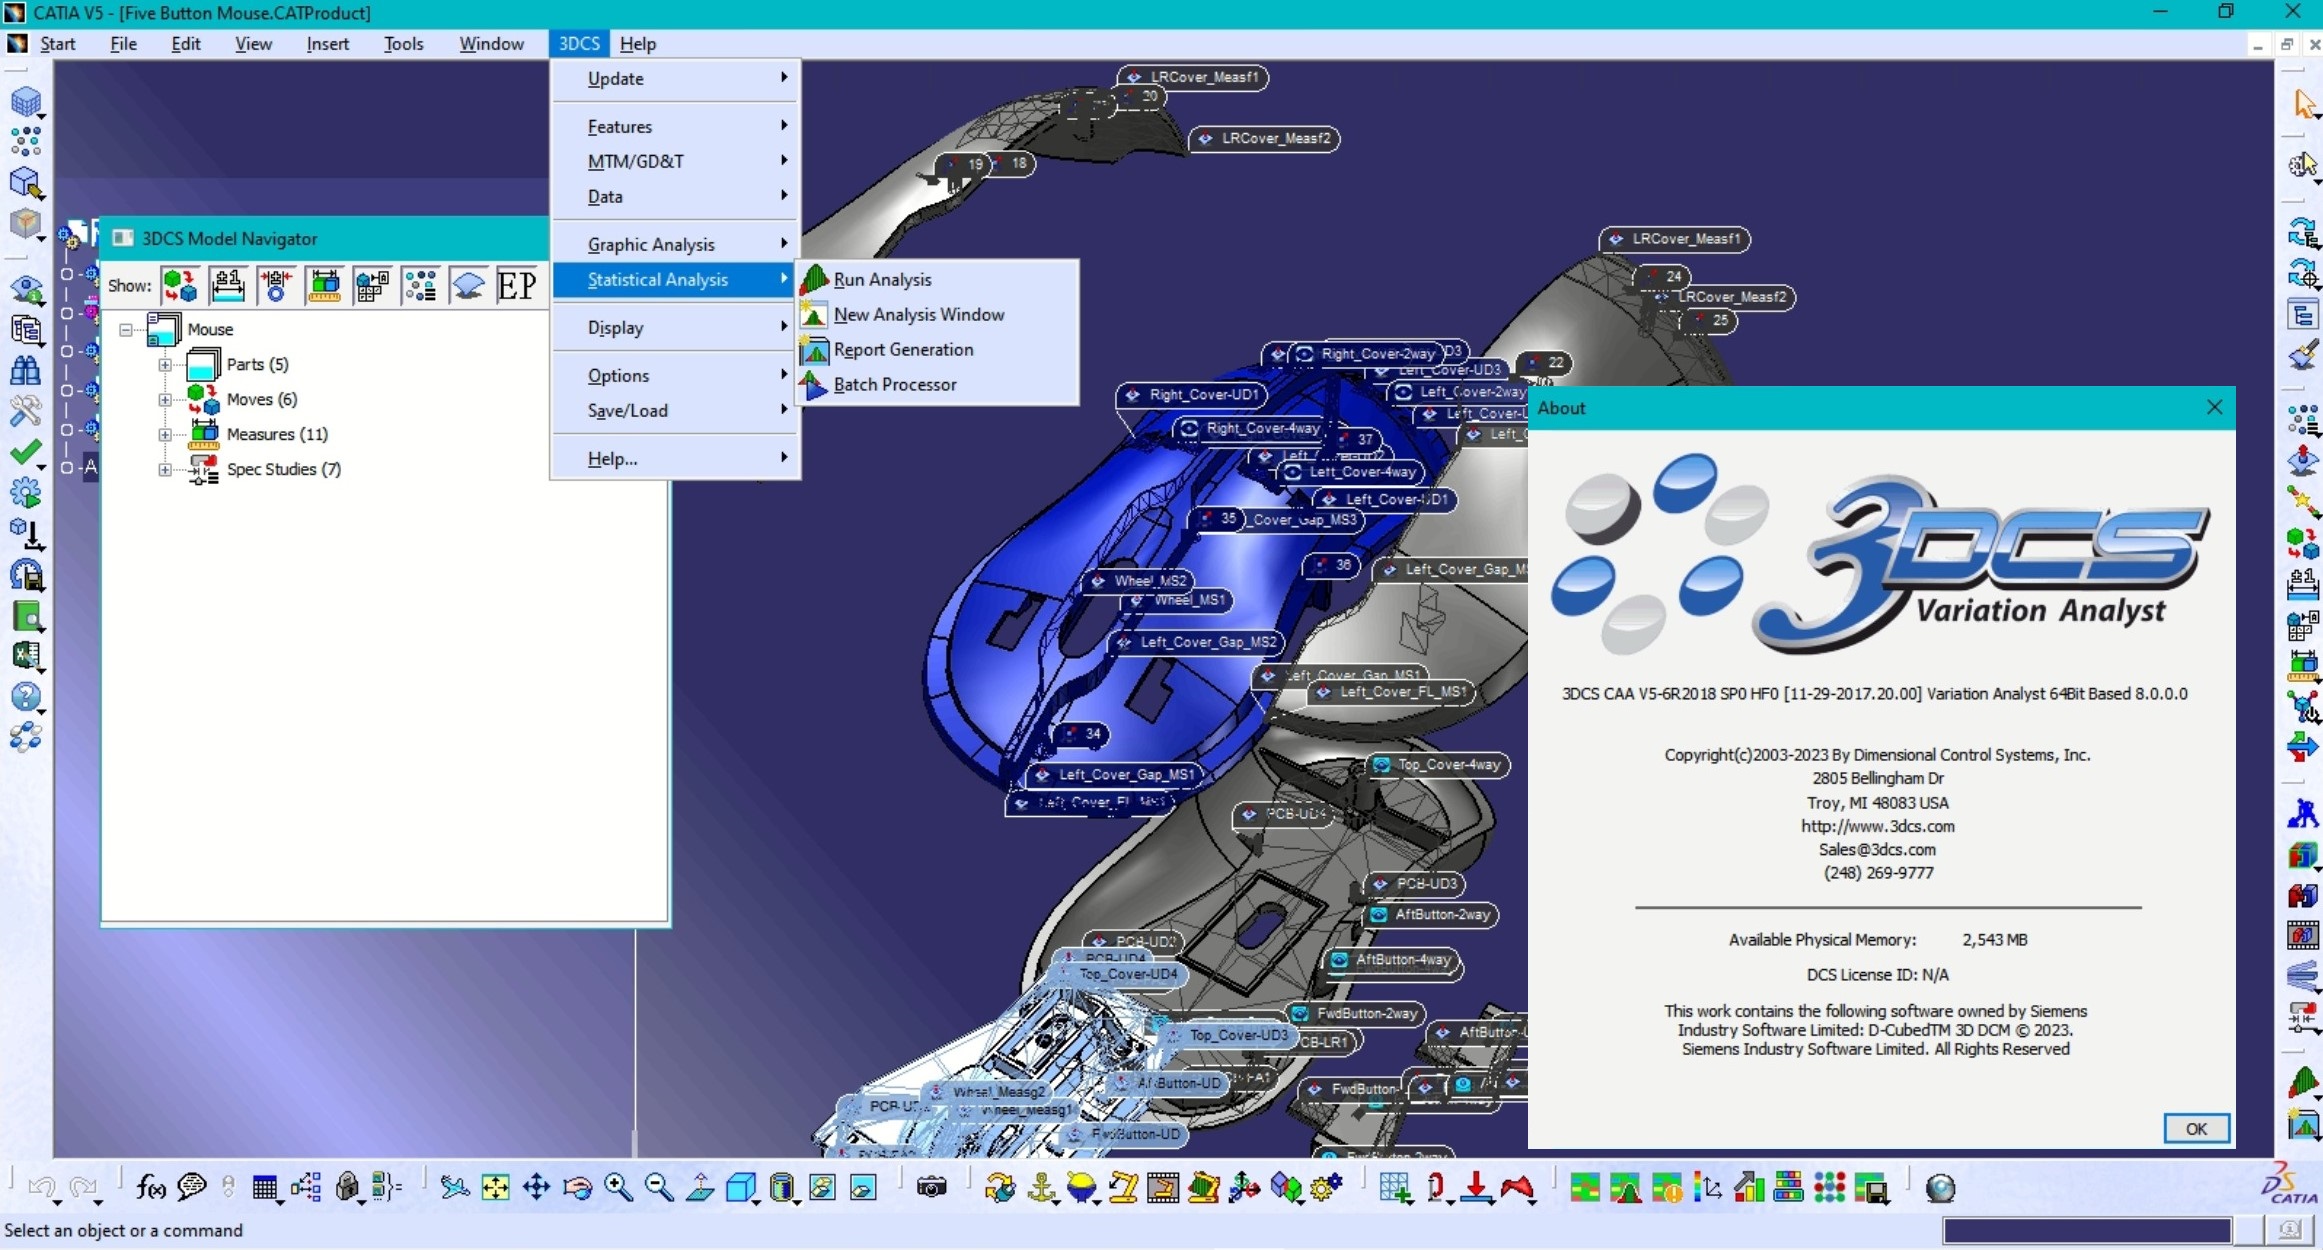 Working with 3DCS Variation Analyst 8.0.0.0 for CATIA V5 R21-33 Win64 full license